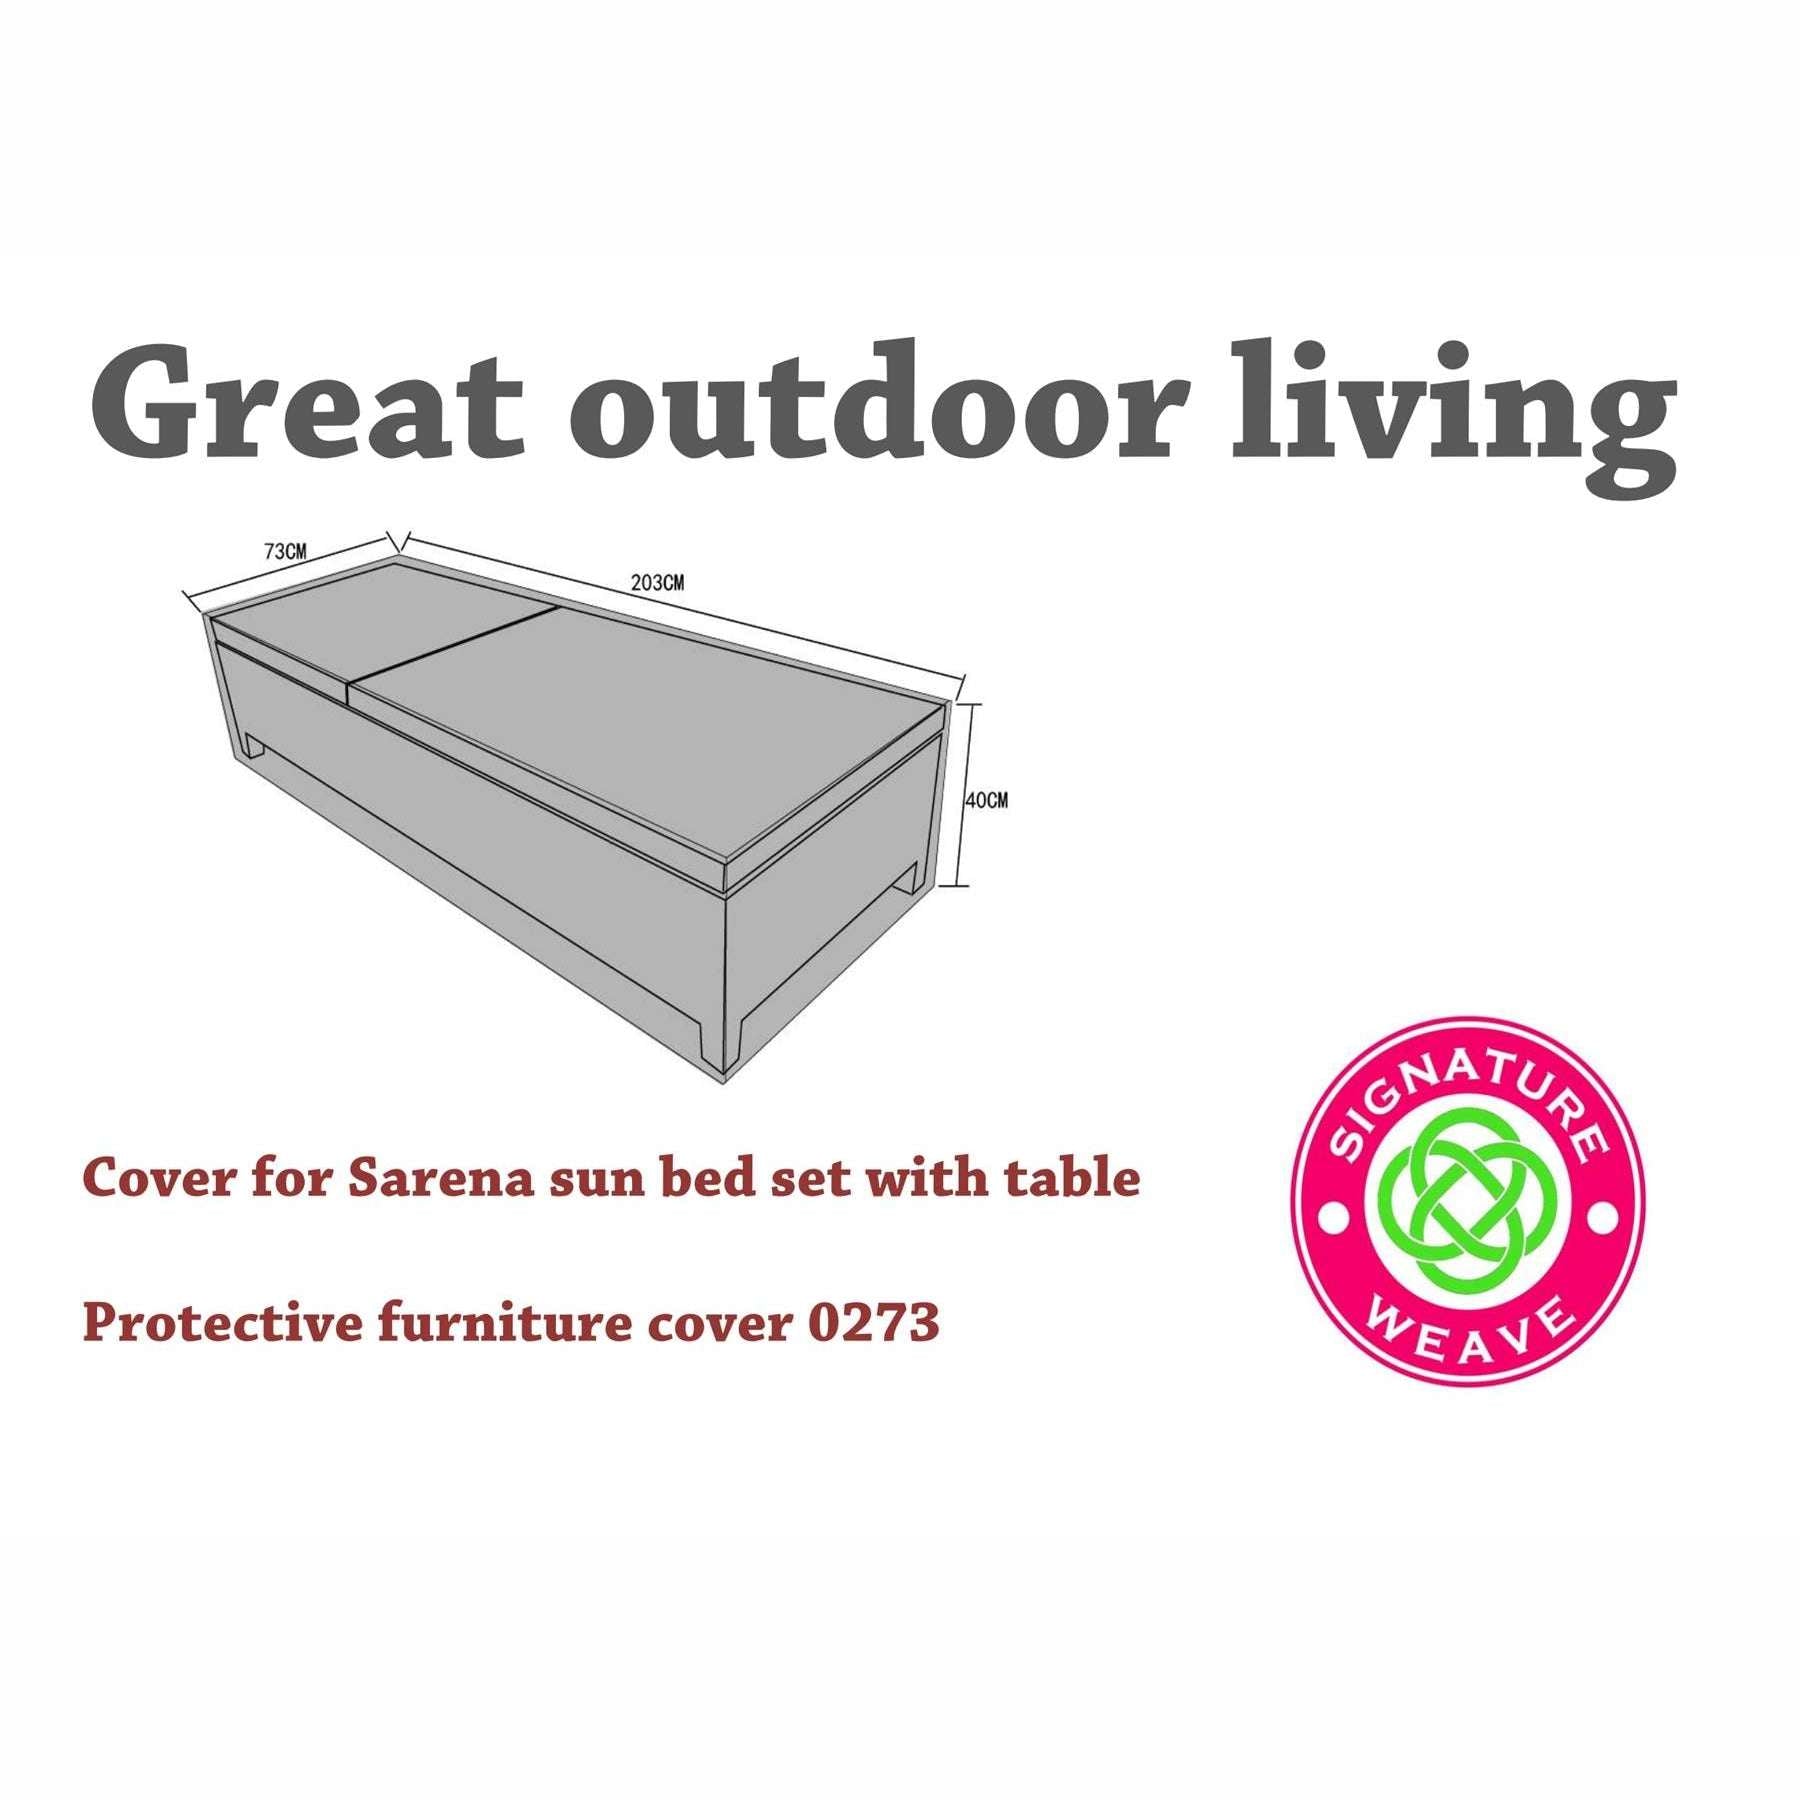 Exceptional Garden:Signature Weave Sunloungers Furniture Cover